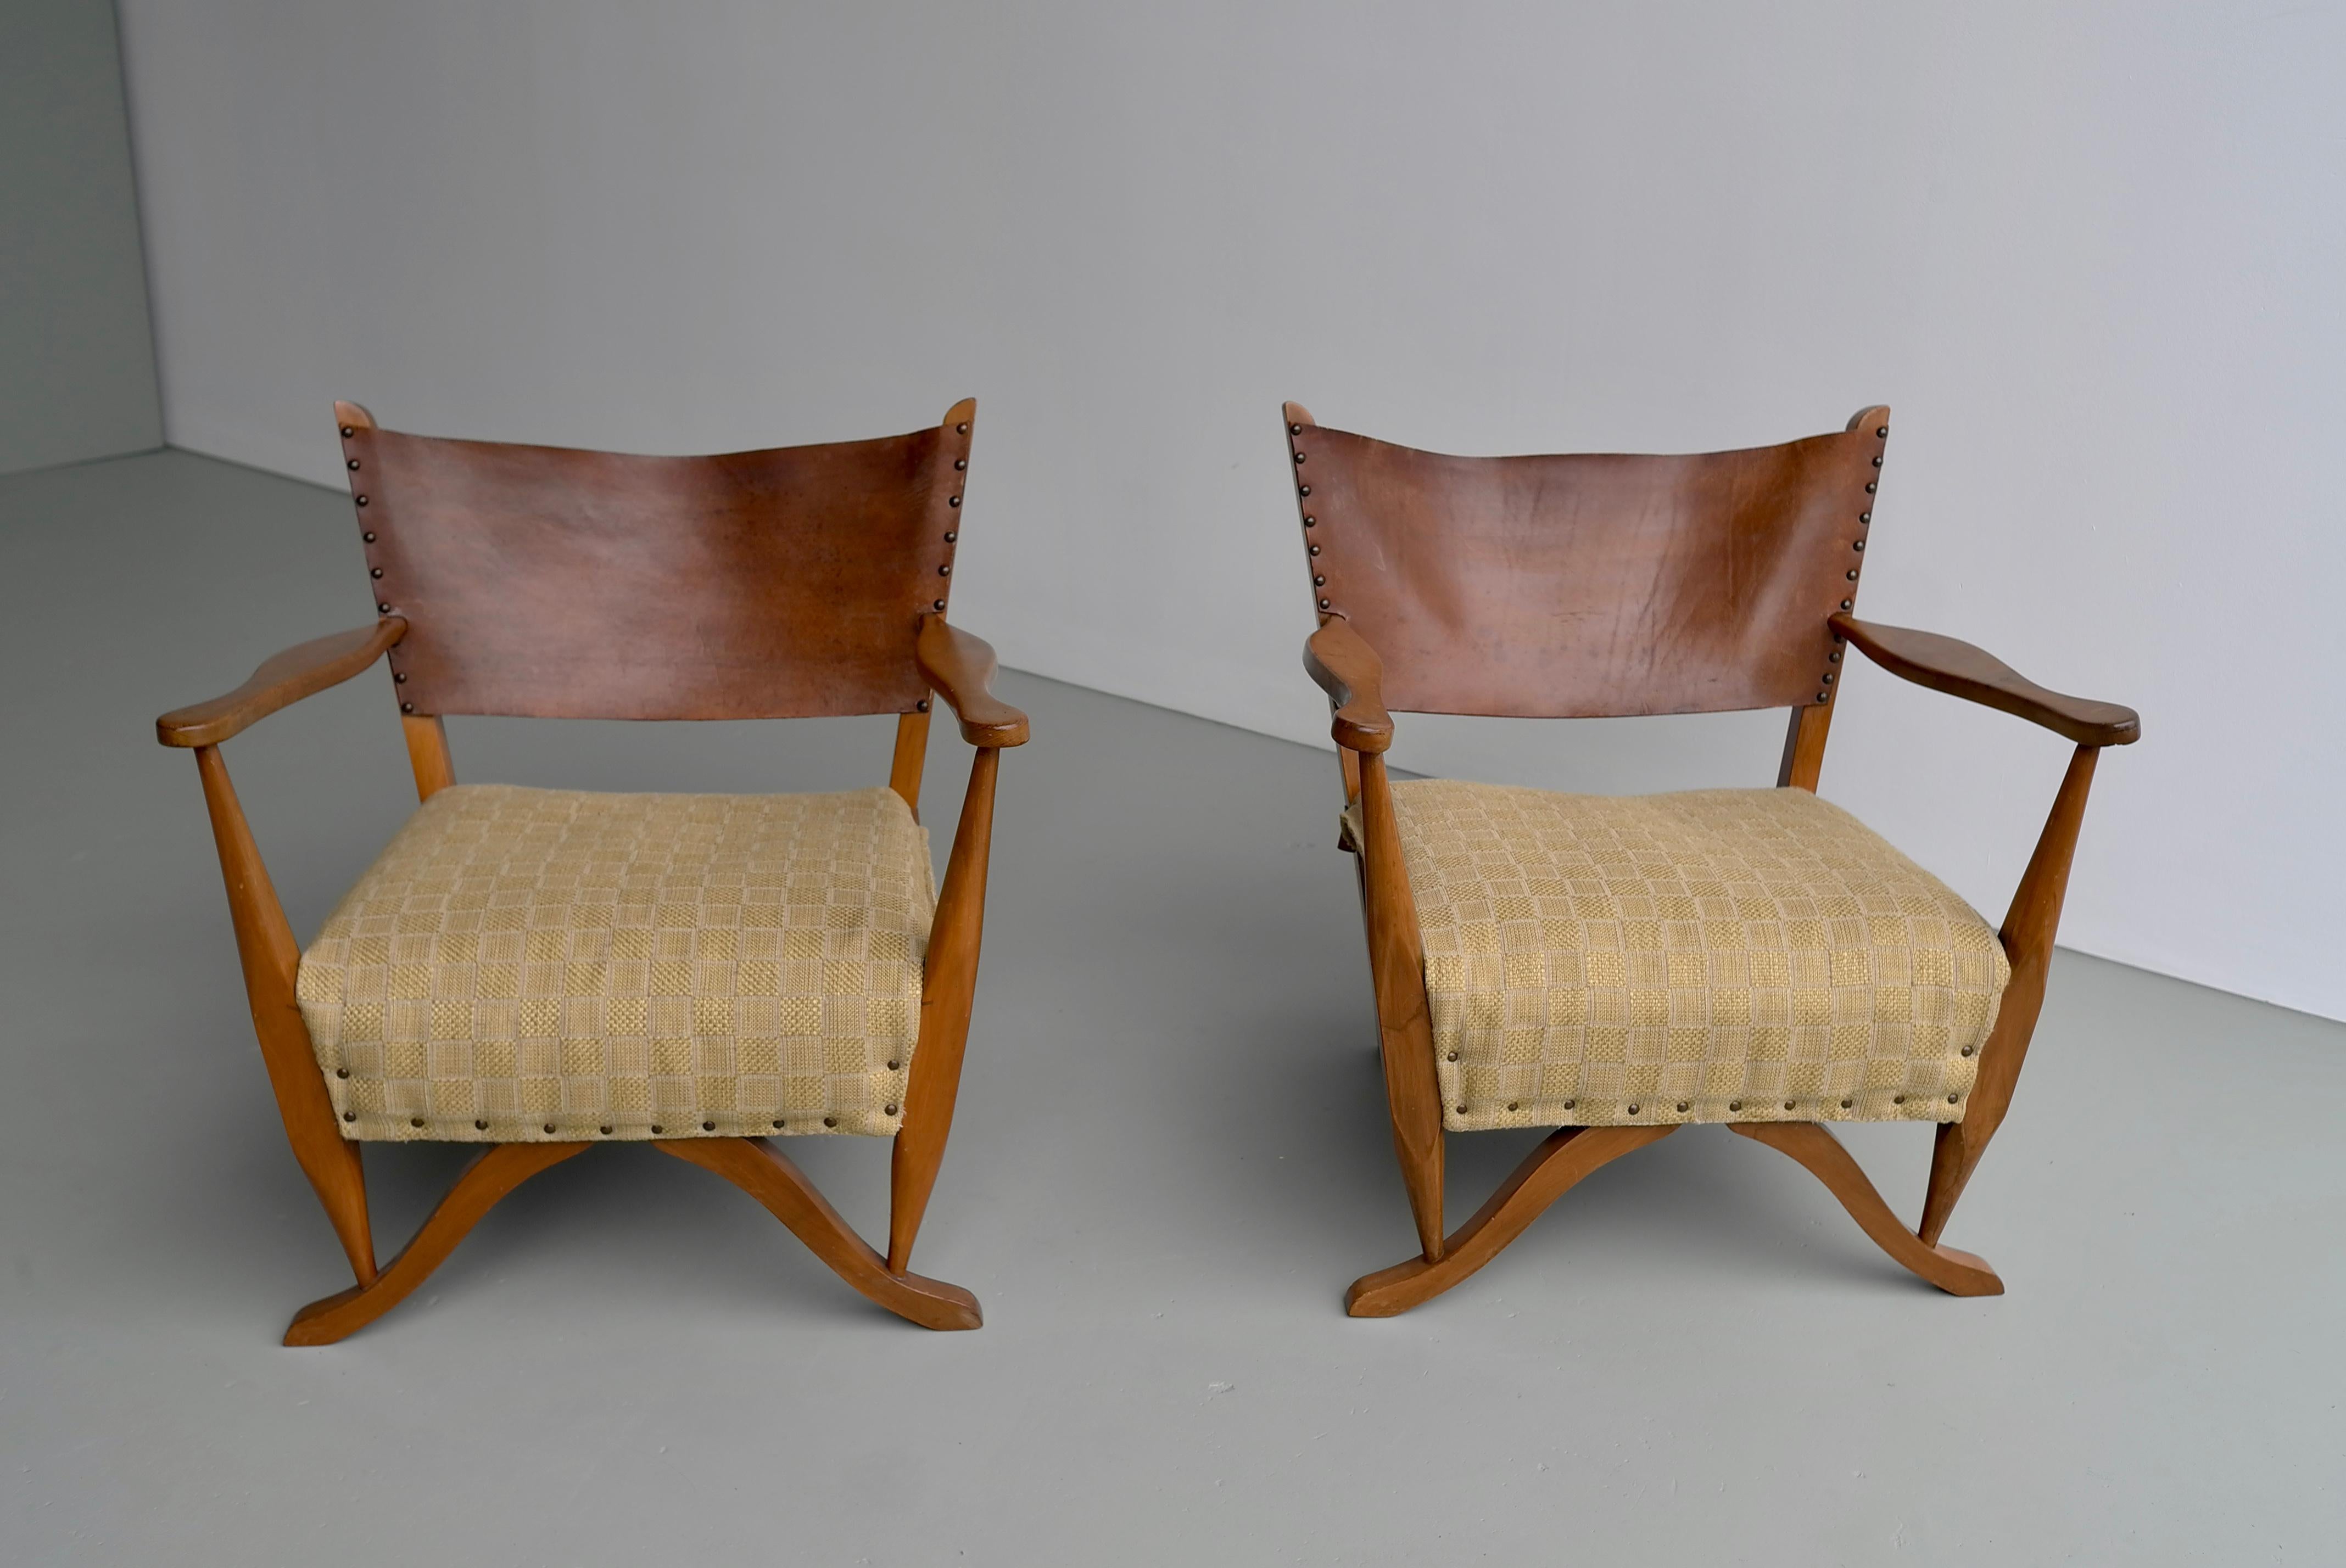 Pair of Mahogany Armchairs with Natural Sling Leather Back, Denmark, 1960s For Sale 3